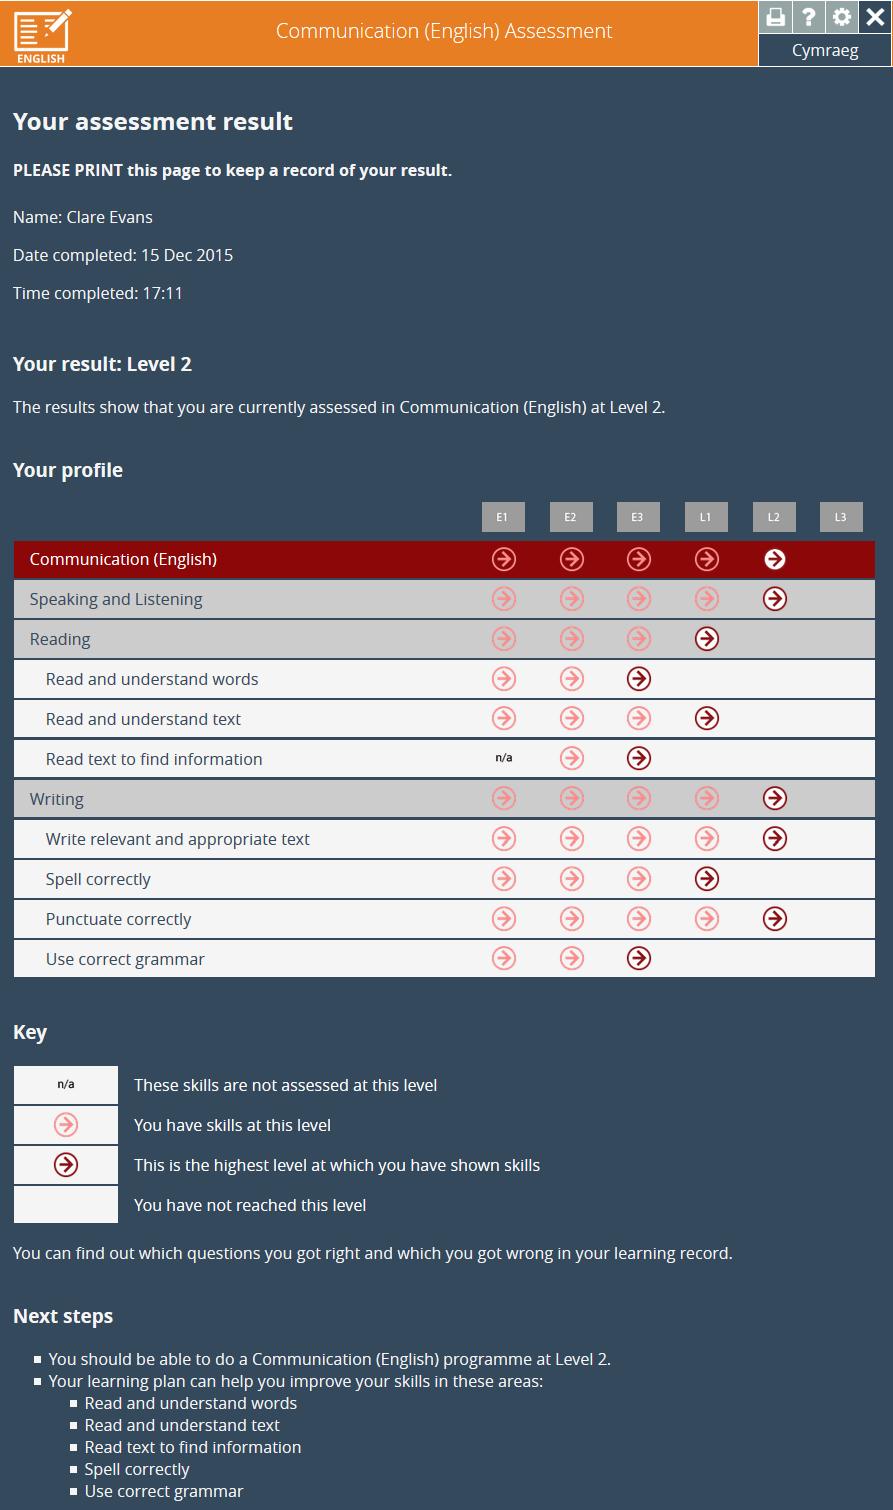 The final page of the assessment shows the result and gives an overall appraisal of the learner s current skill levels.